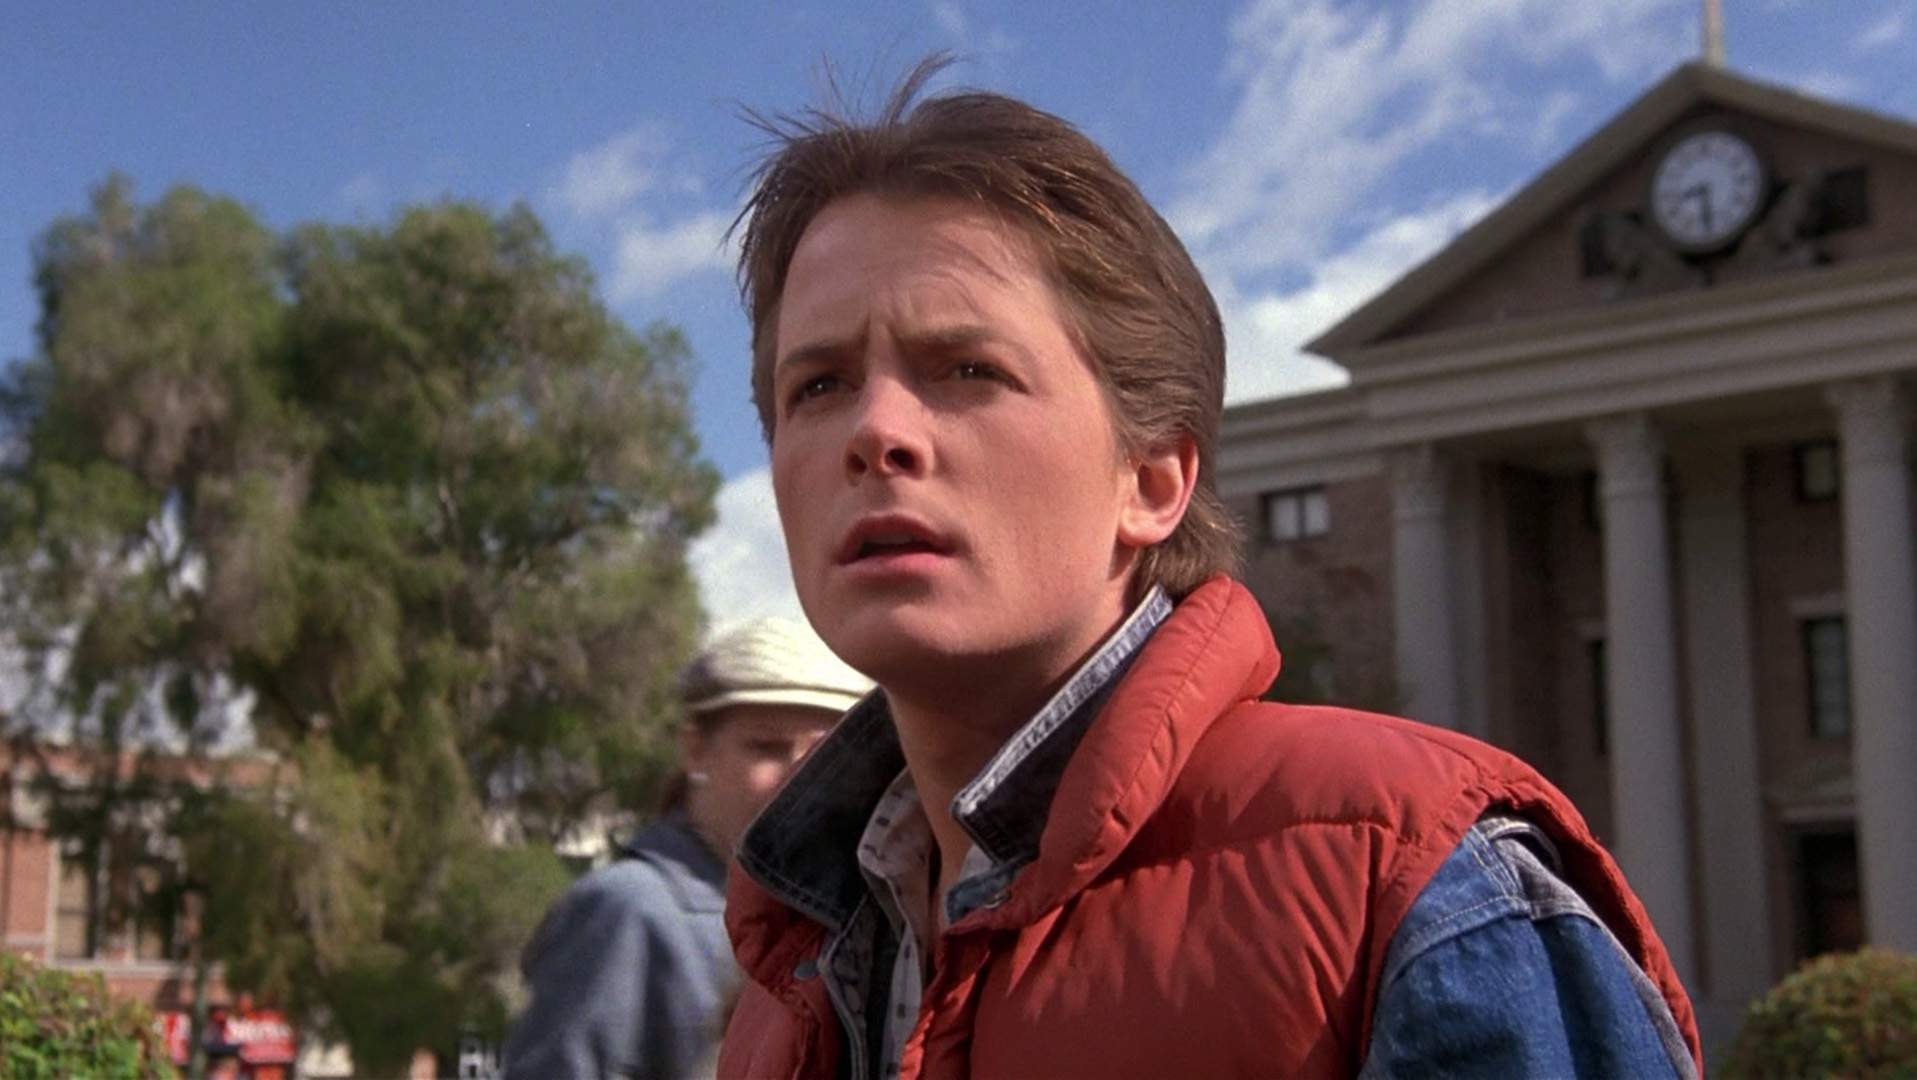 MSO's 'Back to the Future' Concert Screenings with a Live Orchestral Score Will Get You Exclaiming 